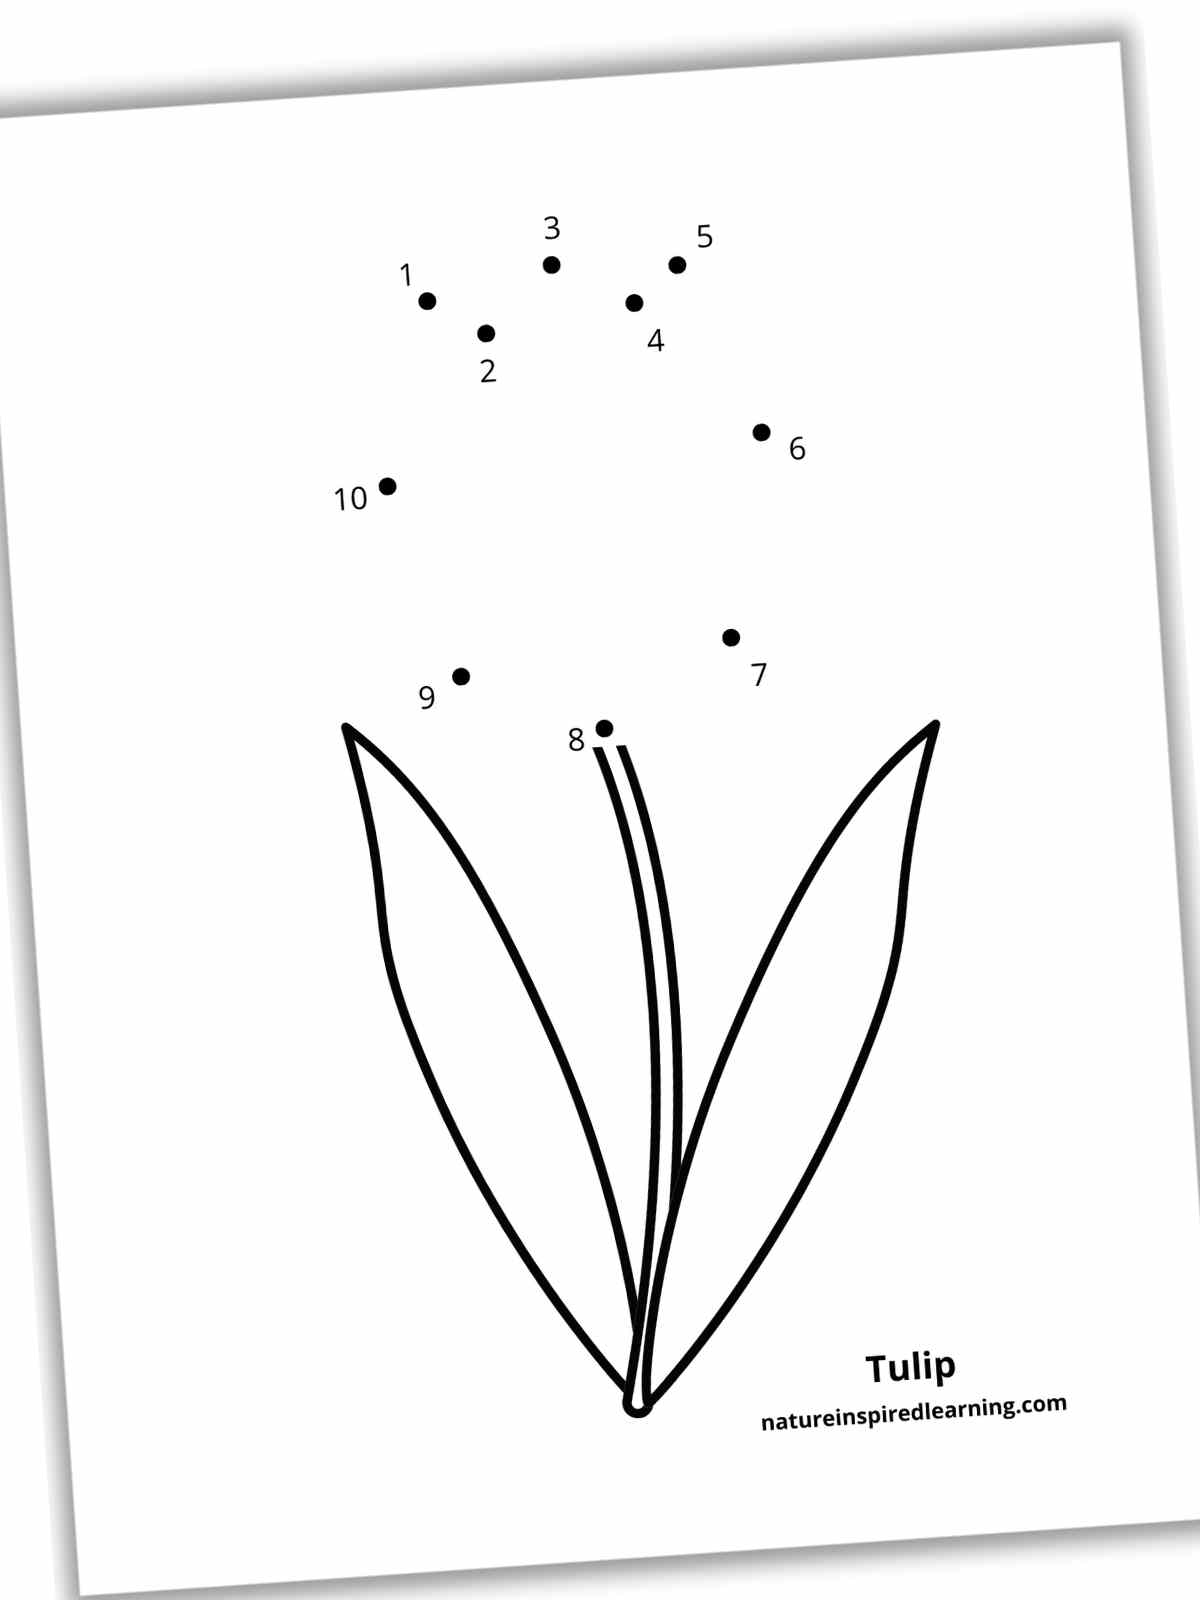 Black and white dot to dot worksheet with a stem with leaves below dots with numbers instead of a flower.